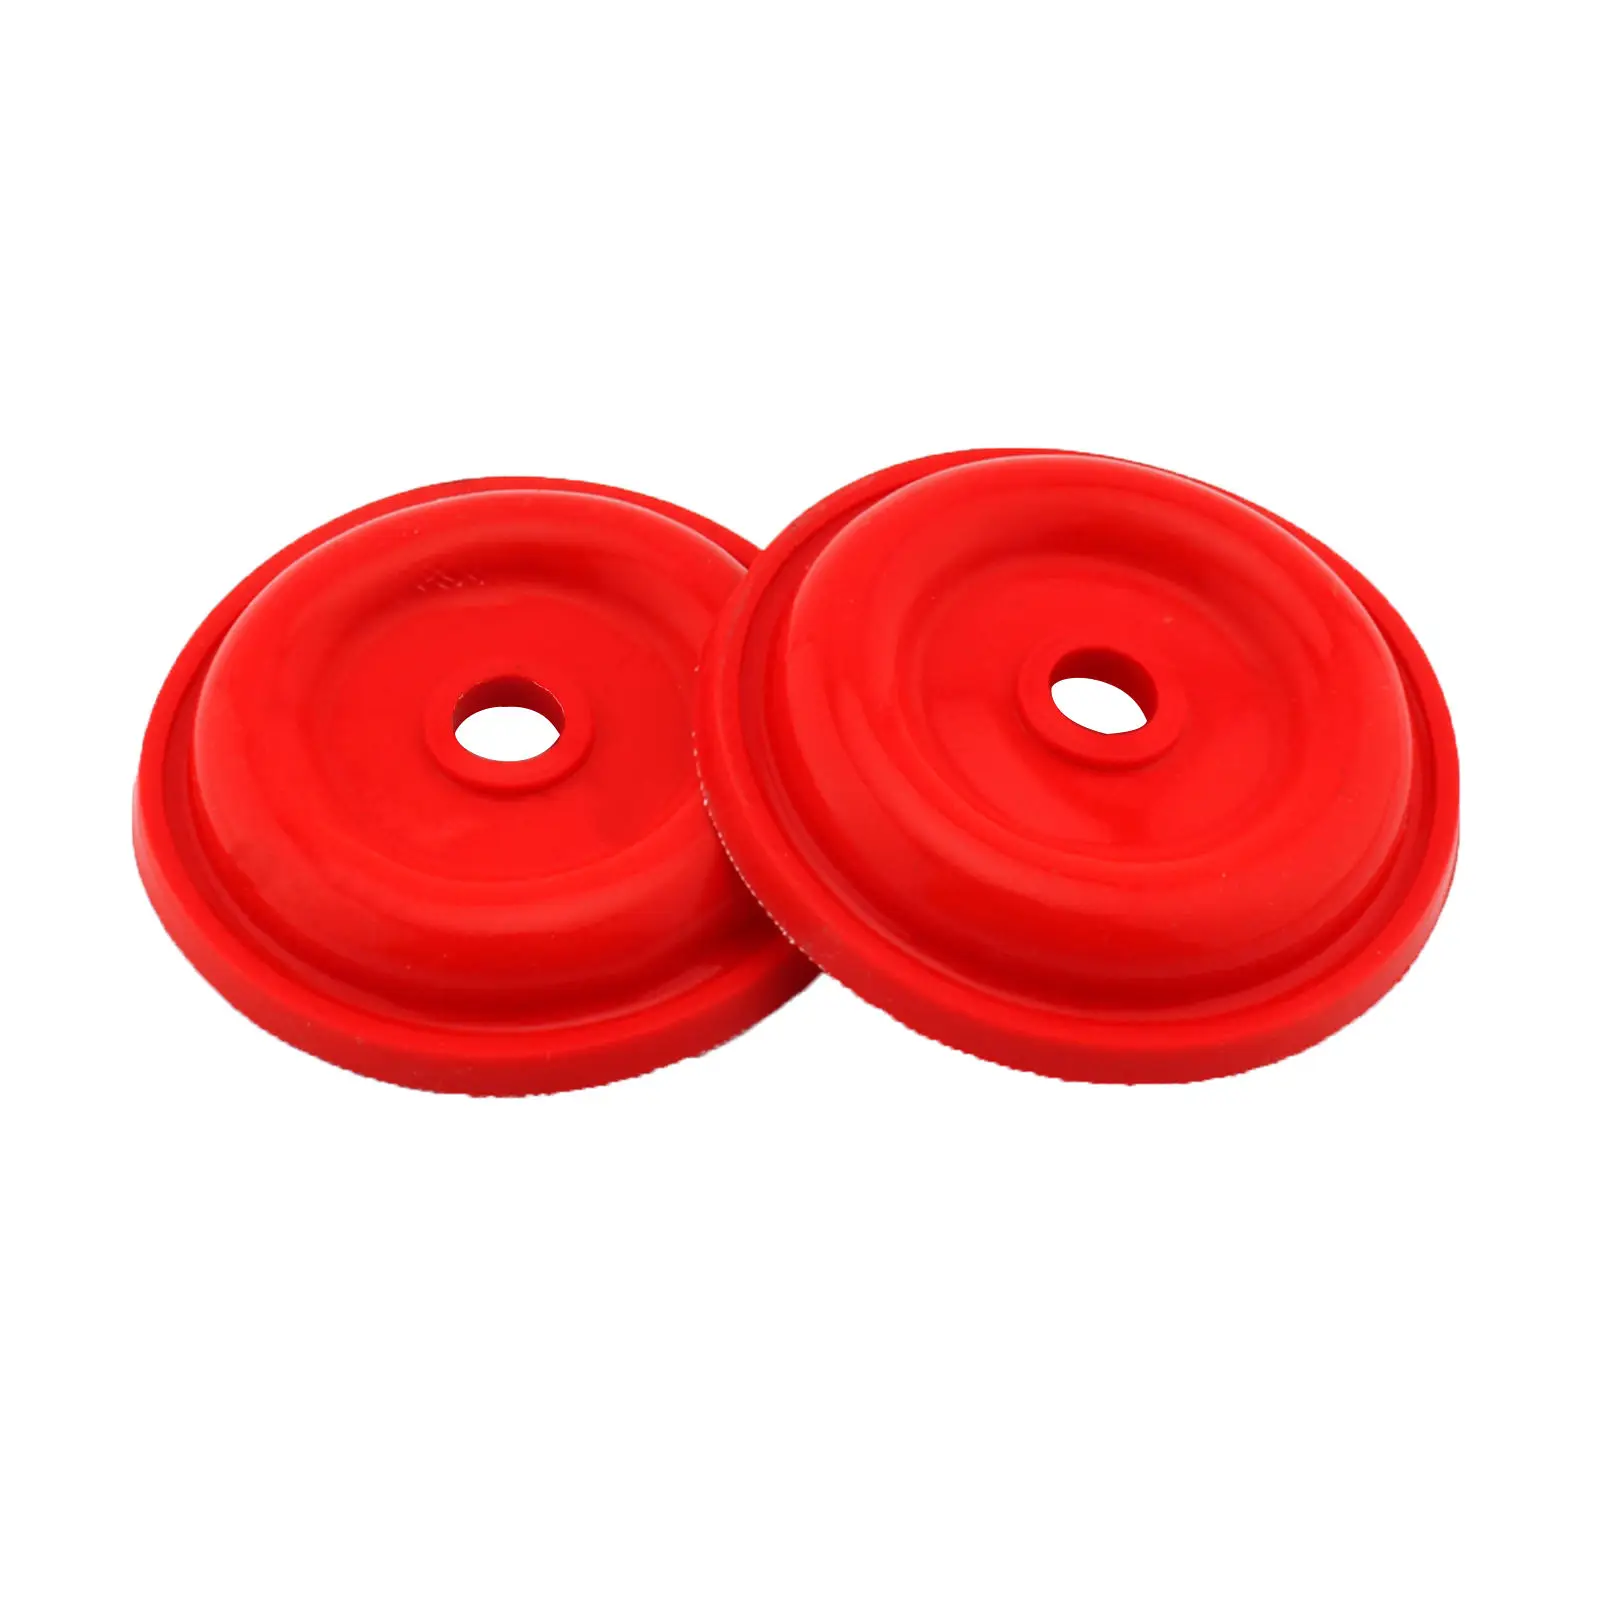 2x Exhaust Valve Bellows 5414495 5410000 5412733 5412147 Fits for Polaris Snowmobiles 440 to 900 Boat Accessories Red